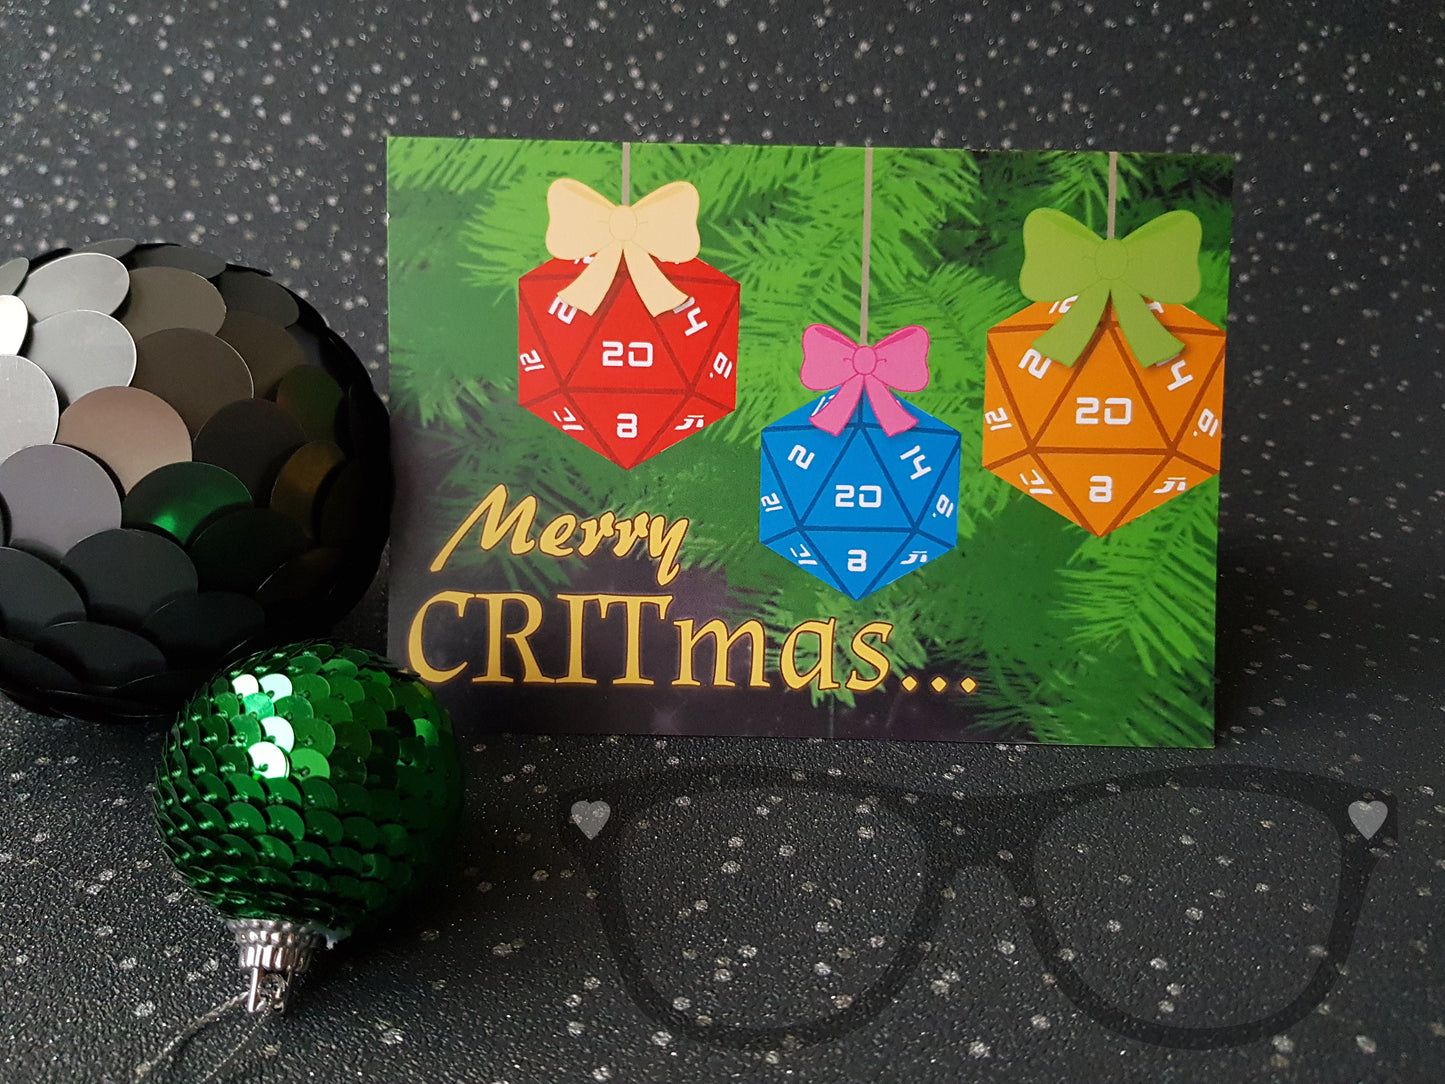 A Christmas greeting card that shows a red, blue and yellow 20 sided dice hanging from a festive tree. The text Reads "Merry Critmas" 